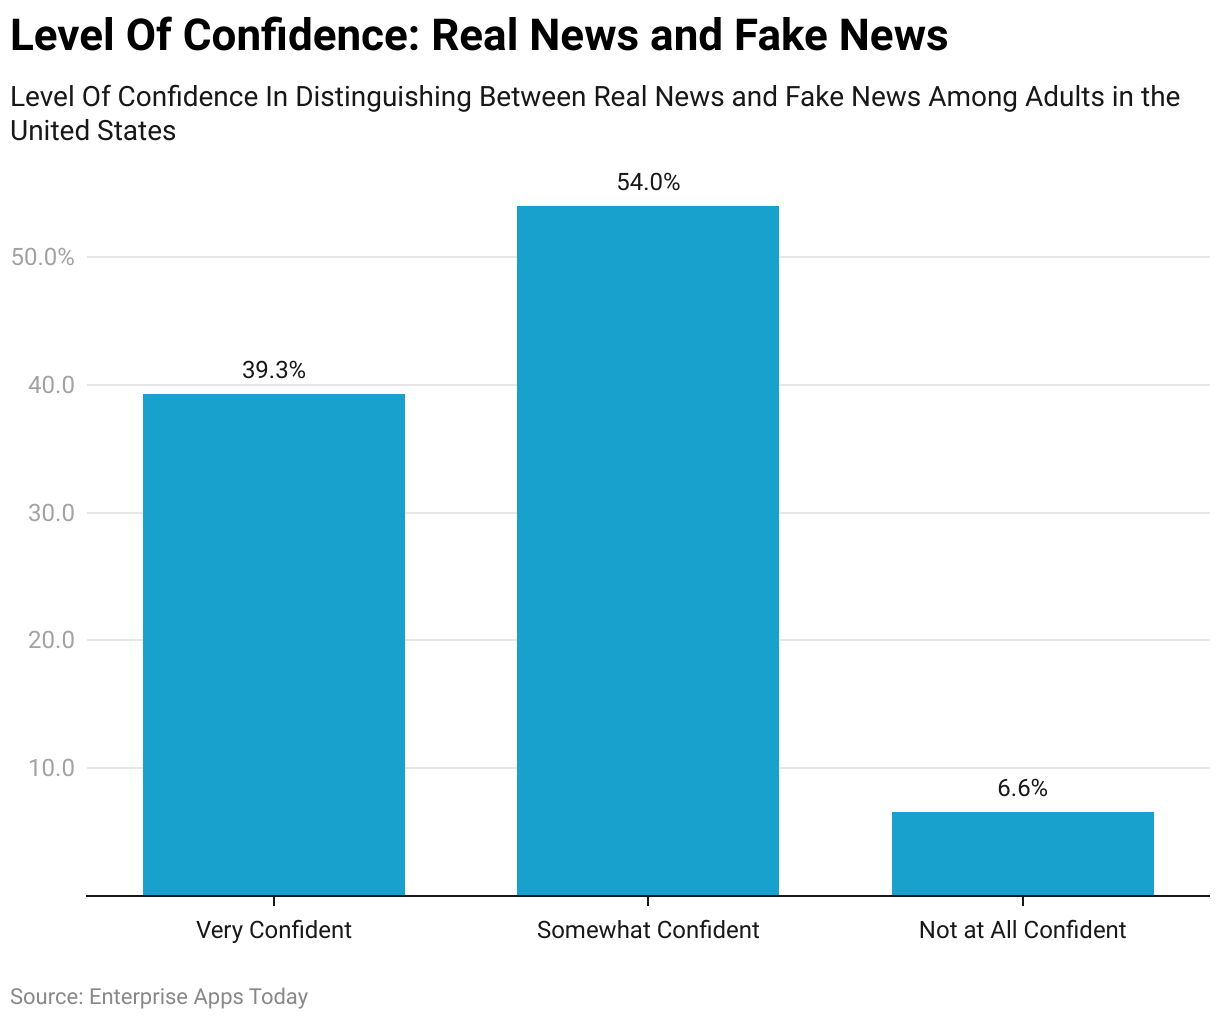 Level Of Confidence In Distinguishing Between Real News and Fake News Among Adults in the United States